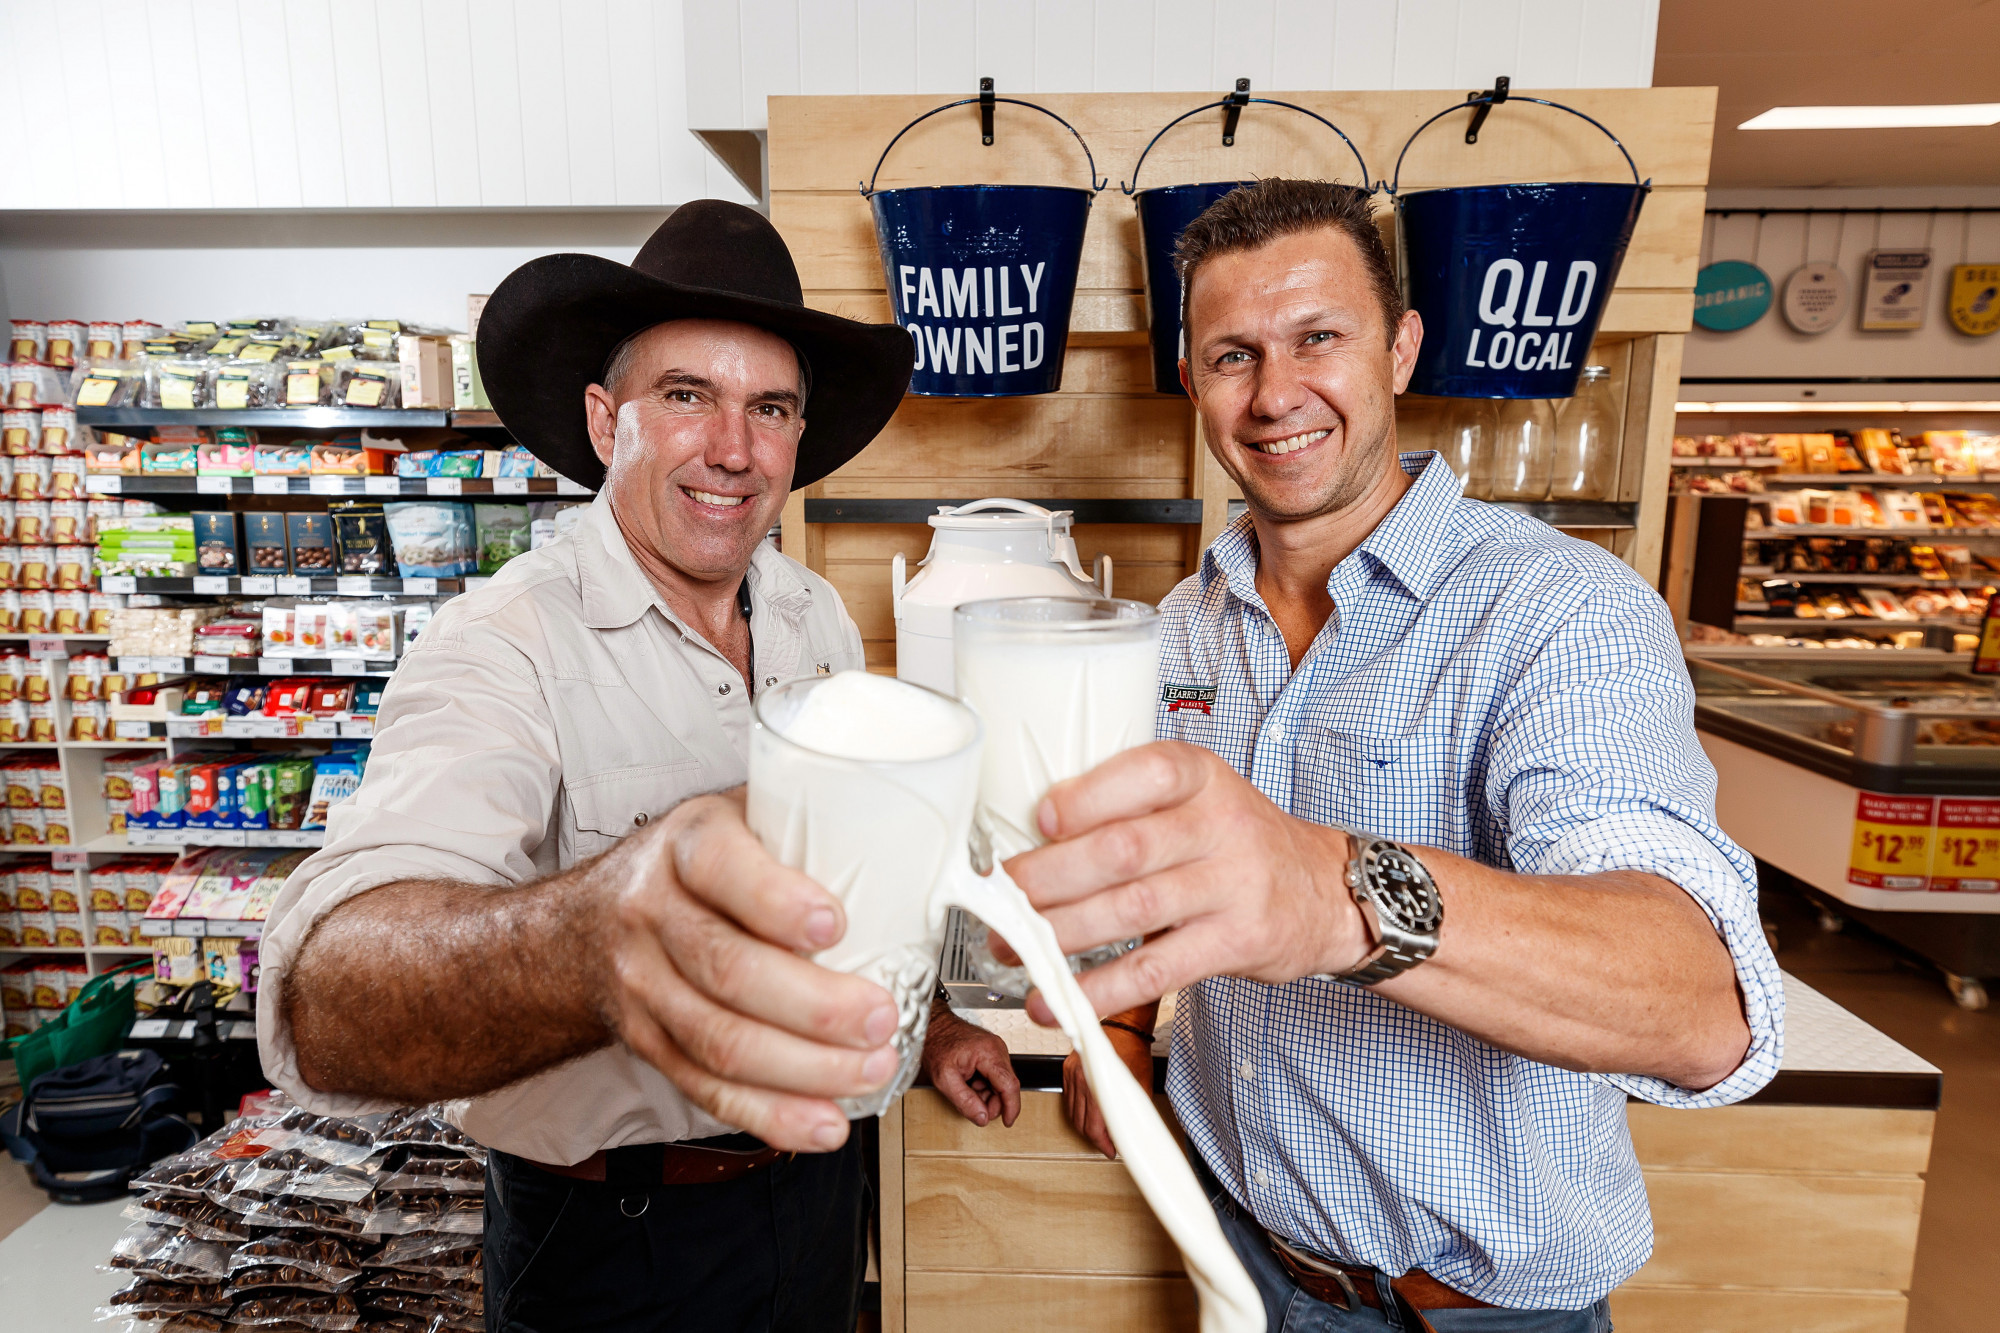 Maleny Dairies’ Milk on Tap in Brisbane - feature photo